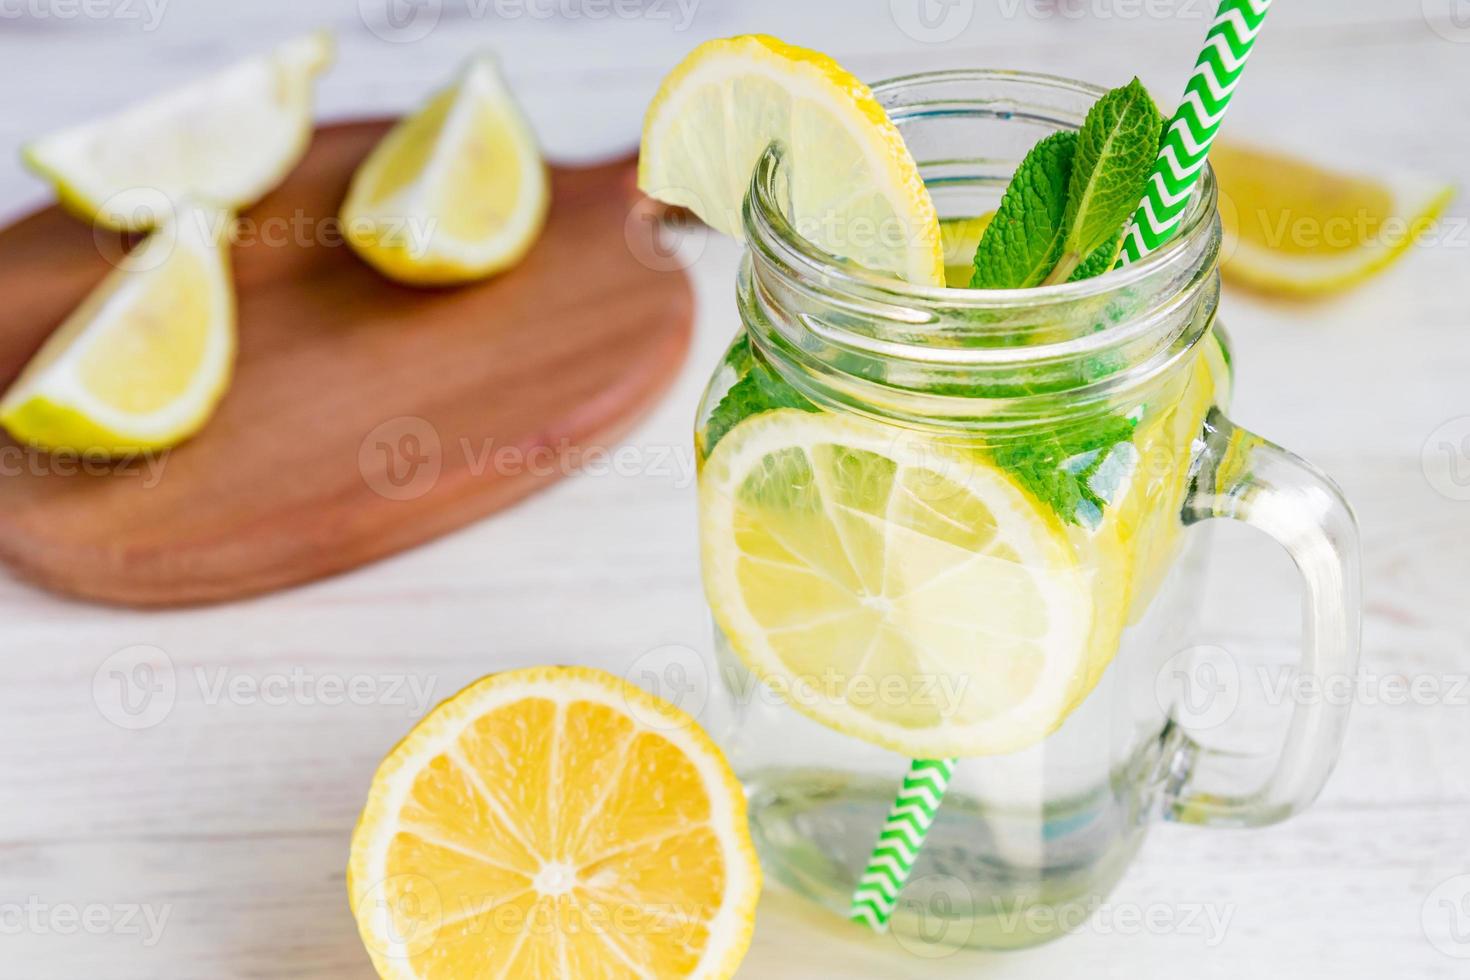 Mason jar glass of homemade lemonade with lemons, mint and green paper straw on wooden rustic background. Summer refreshing beverage. photo